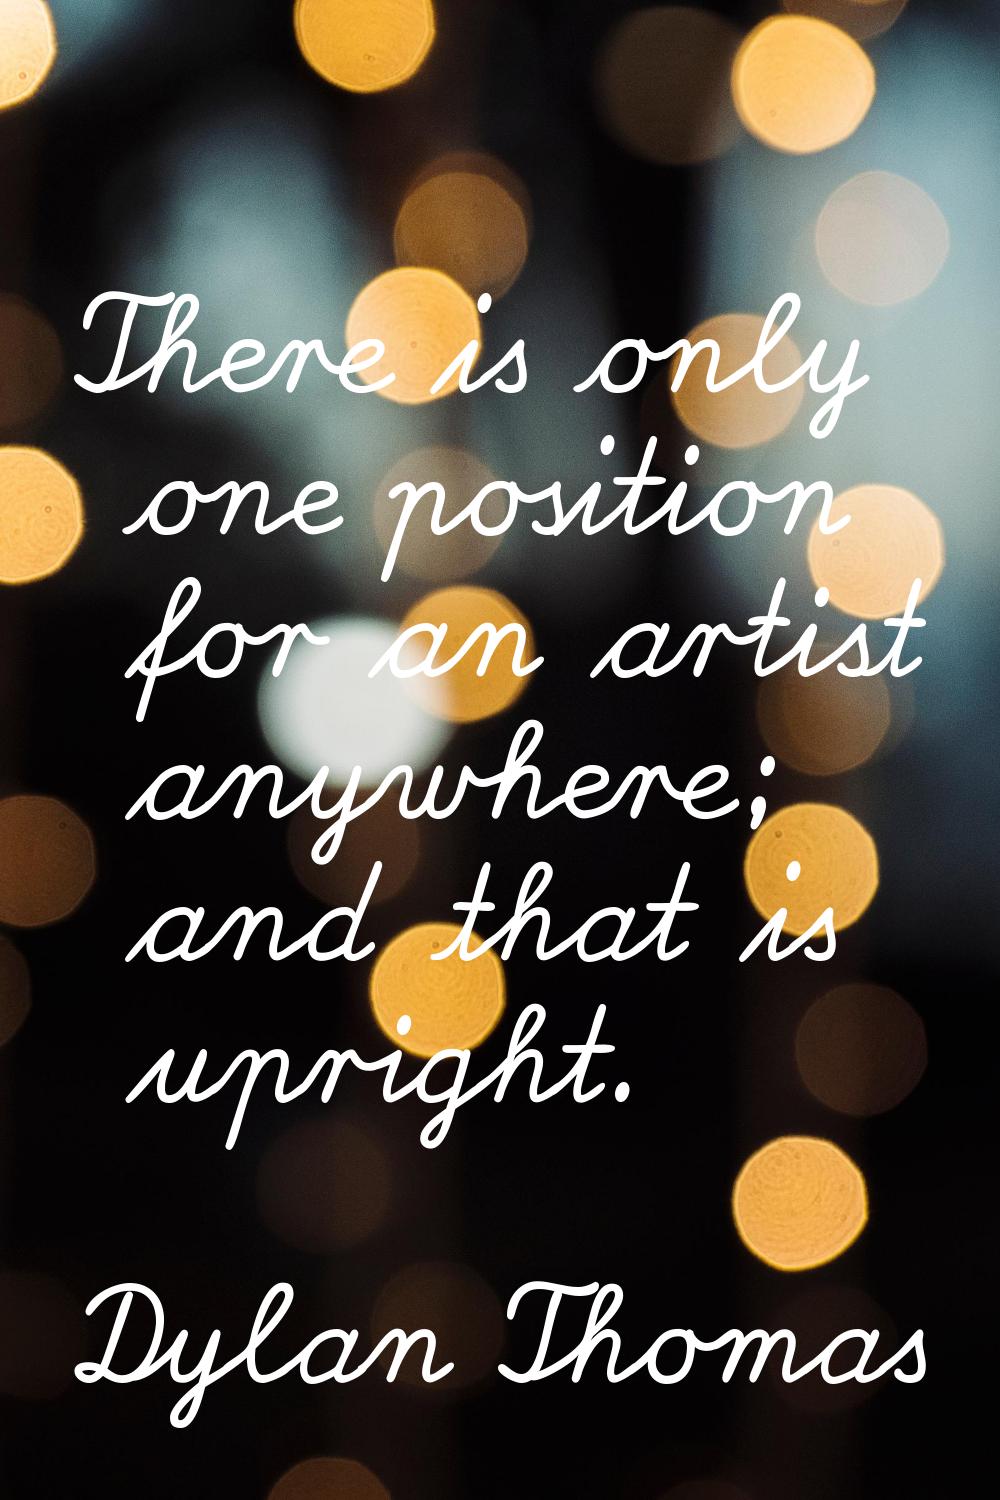 There is only one position for an artist anywhere; and that is upright.